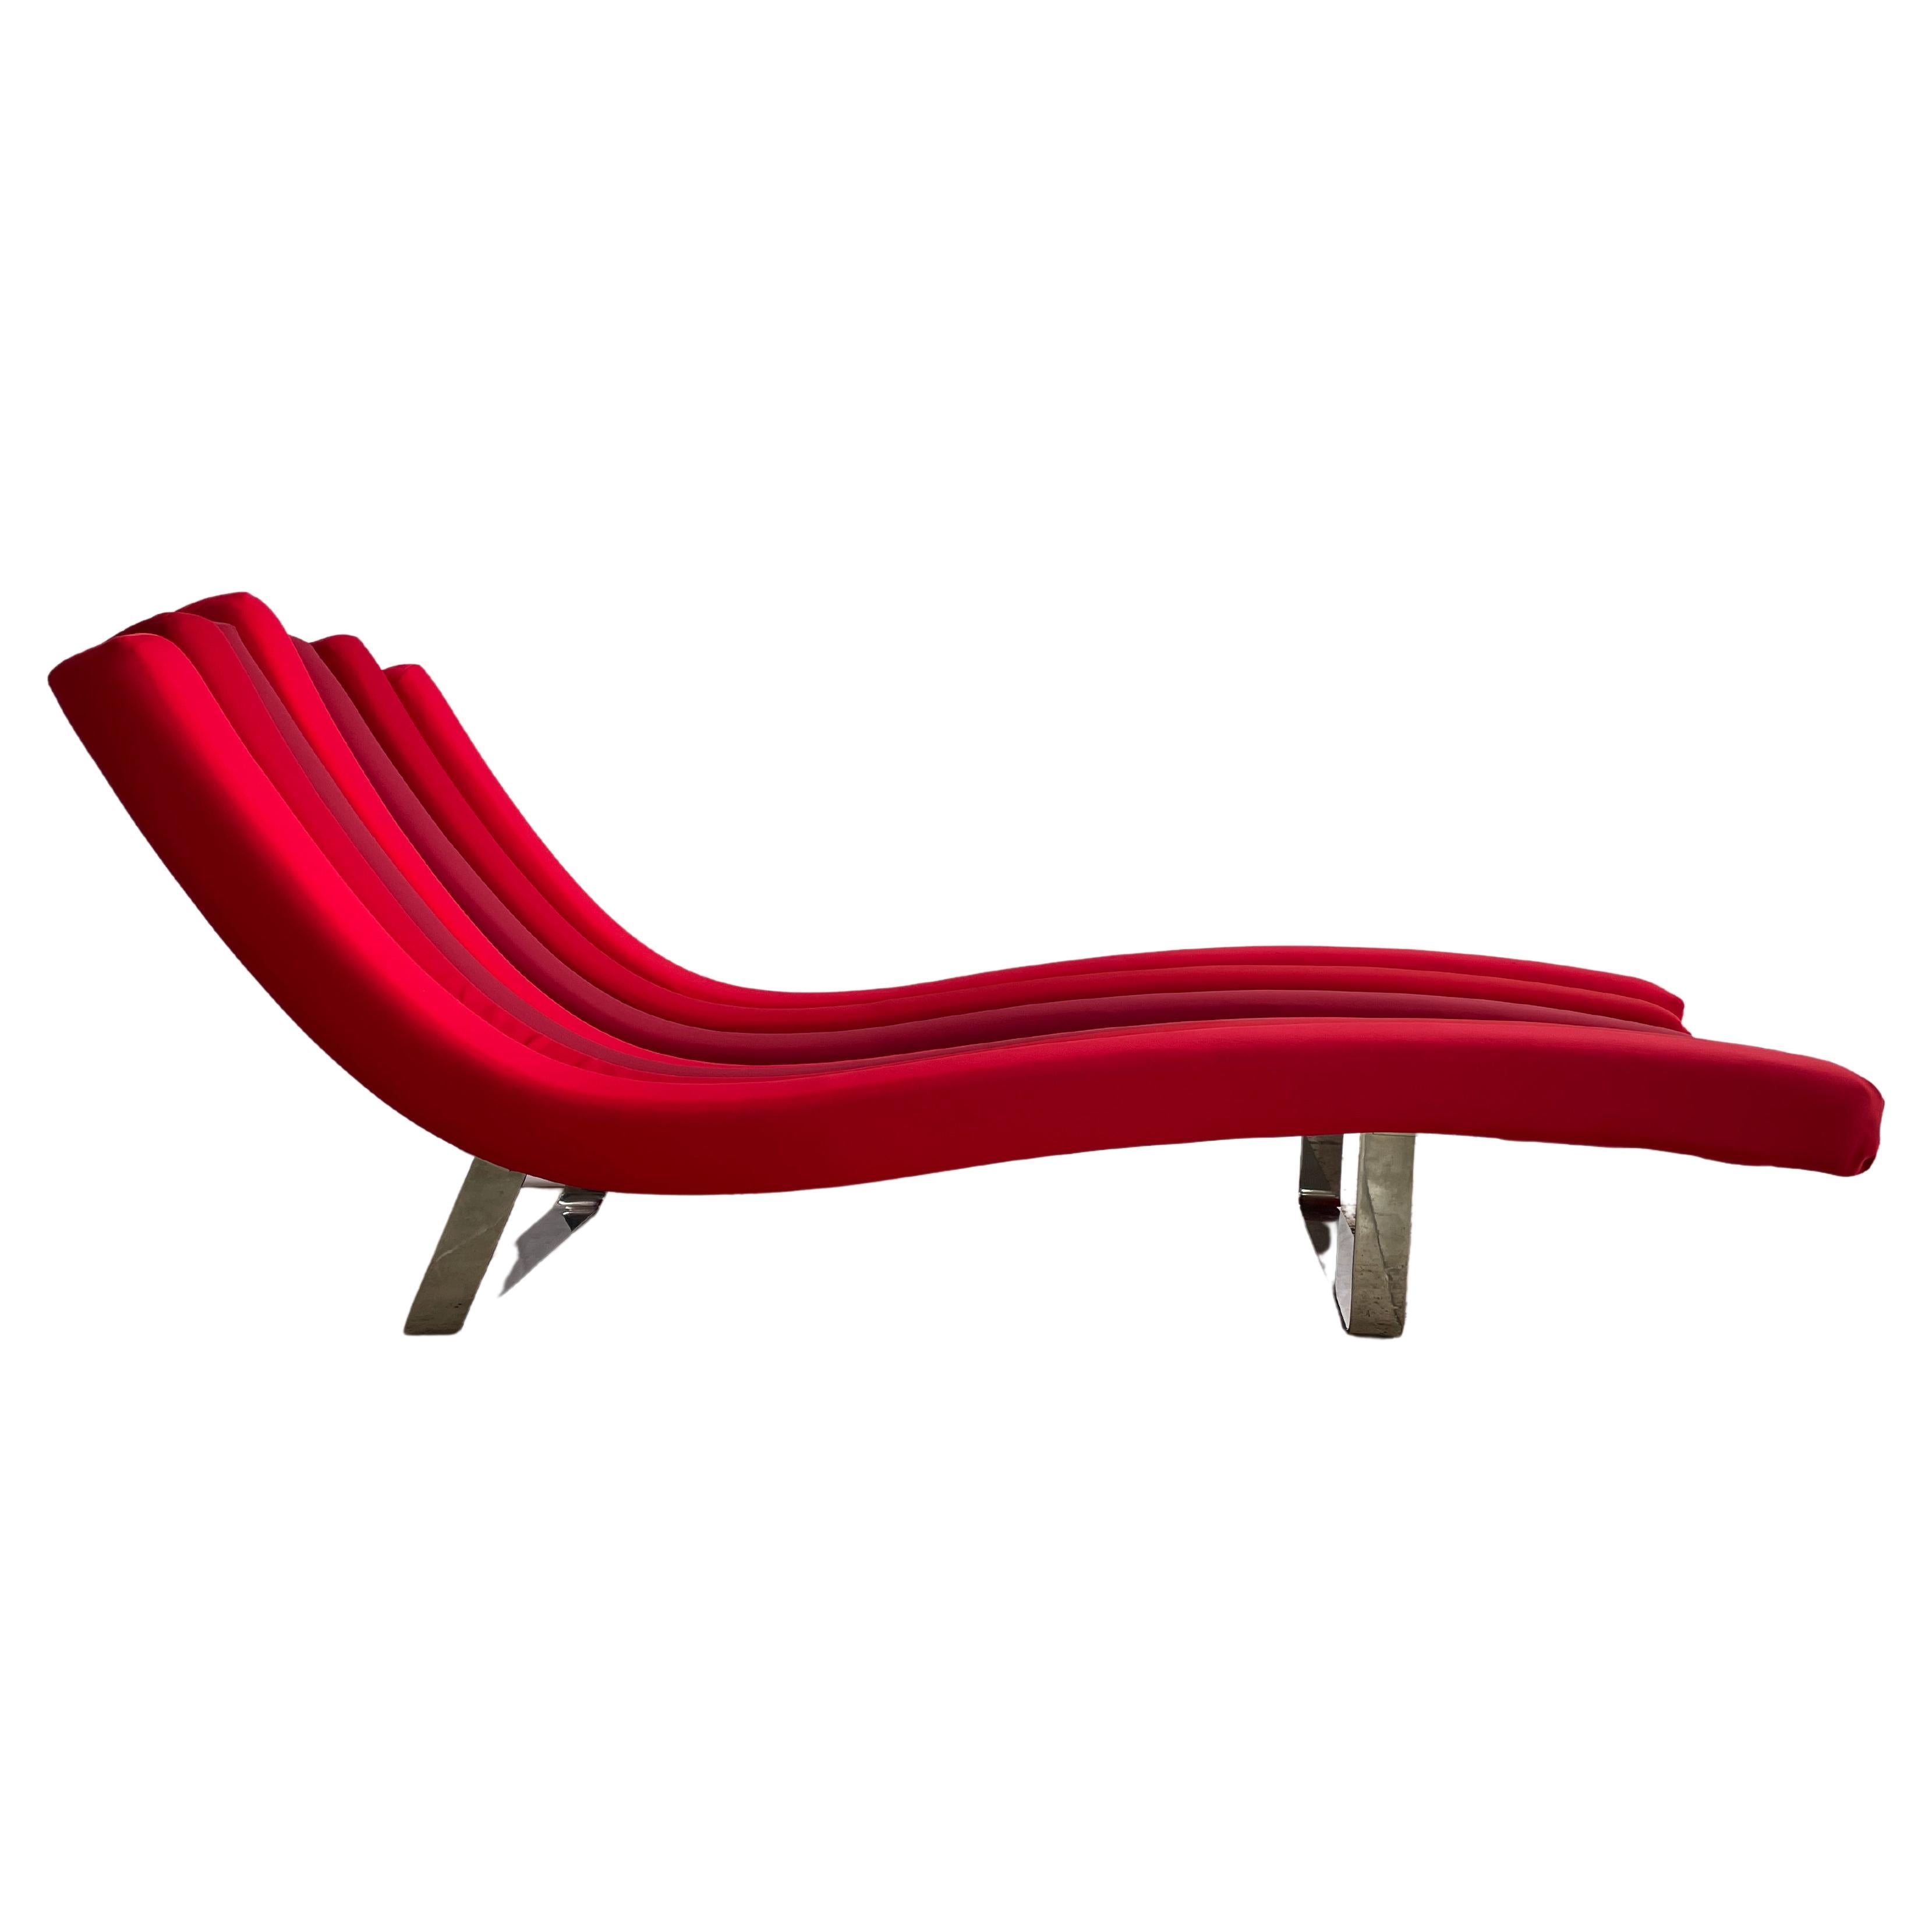 Vitamine Chaise Longues by Roche Bobois, France For Sale at 1stDibs